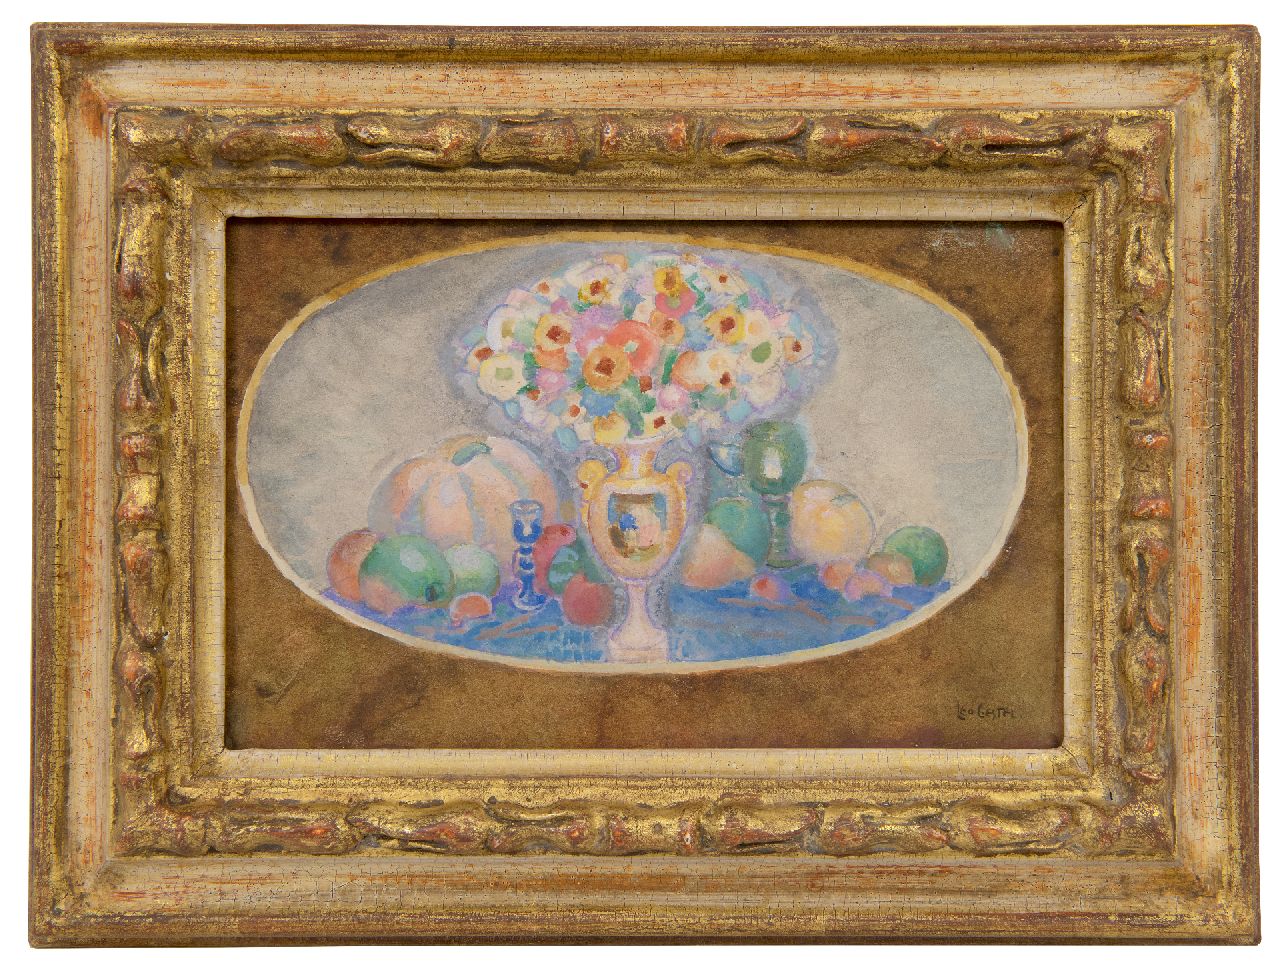 Gestel L.  | Leendert 'Leo' Gestel | Watercolours and drawings offered for sale | Flower medallion, watercolour on paper 15.3 x 22.9 cm, signed l.r.